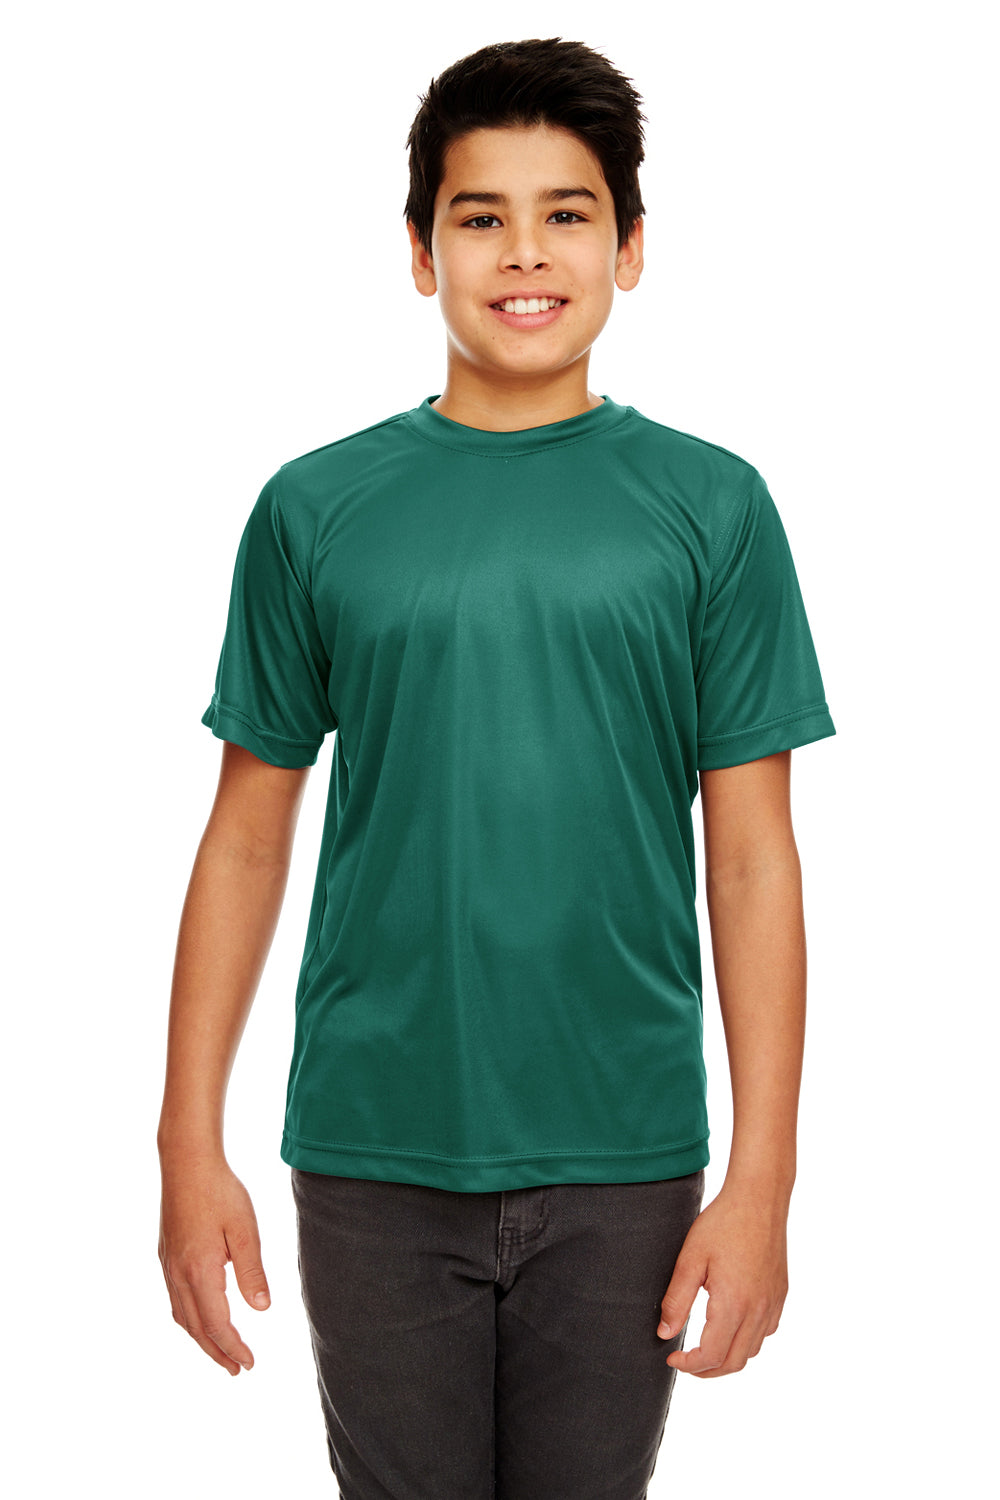 UltraClub 8420Y Youth Cool & Dry Performance Moisture Wicking Short Sleeve Crewneck T-Shirt Forest Green Front